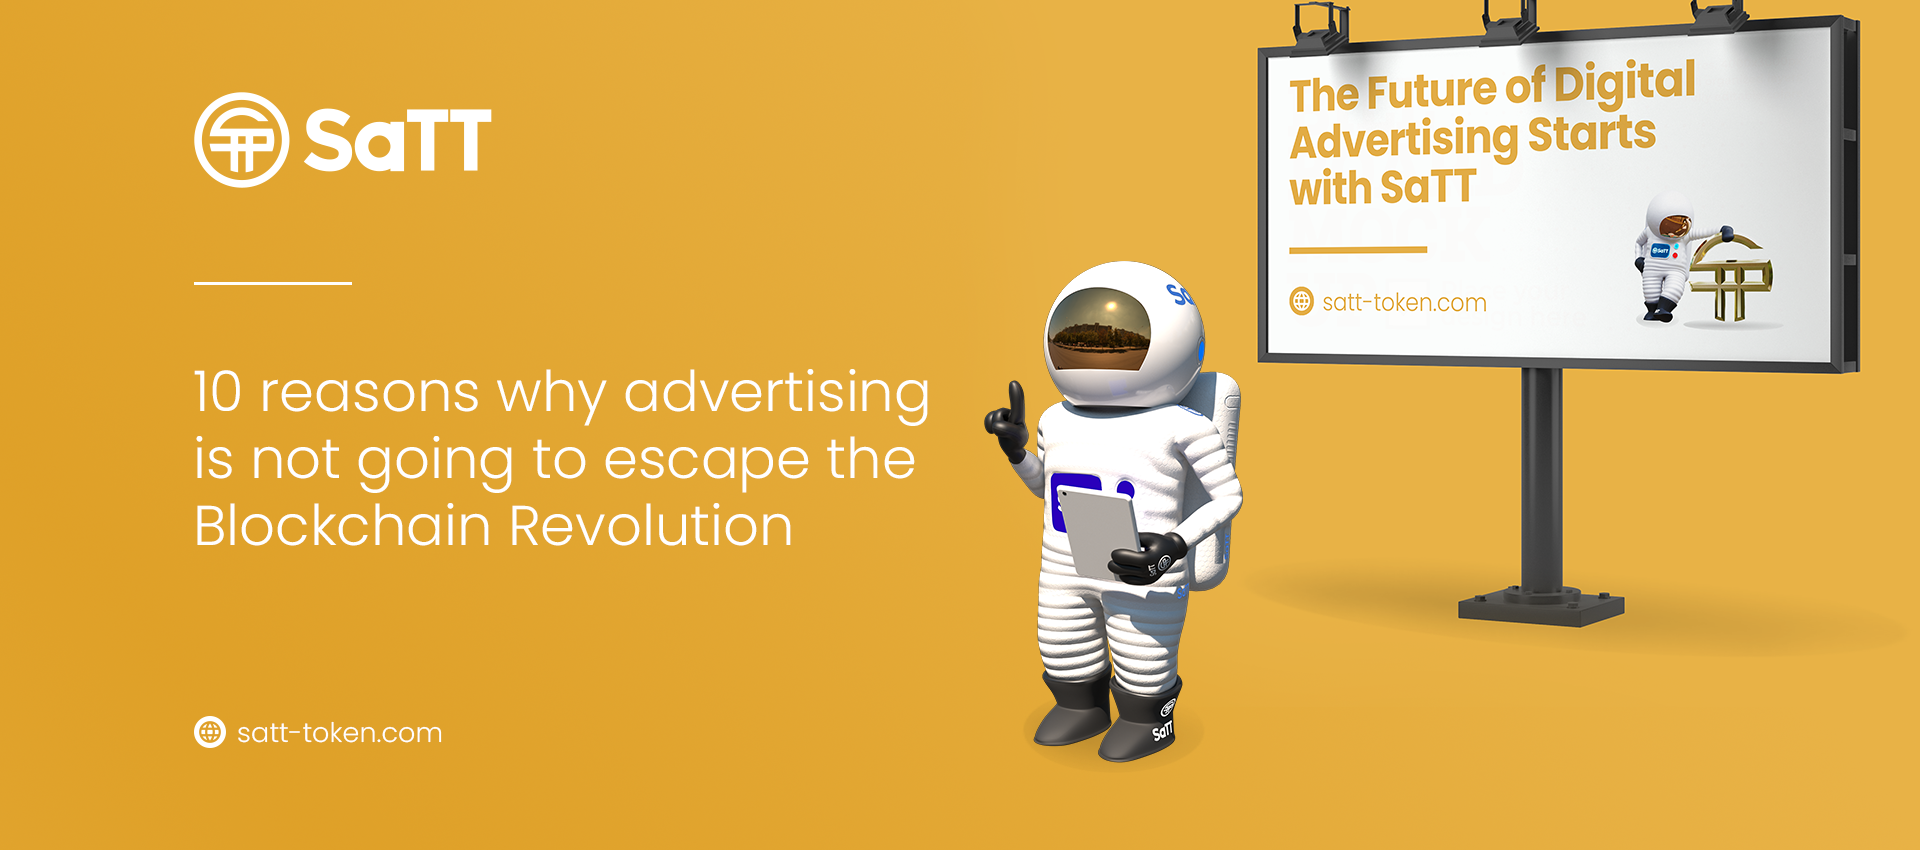 10 reasons why advertising is not going to escape the Blockchain Revolution